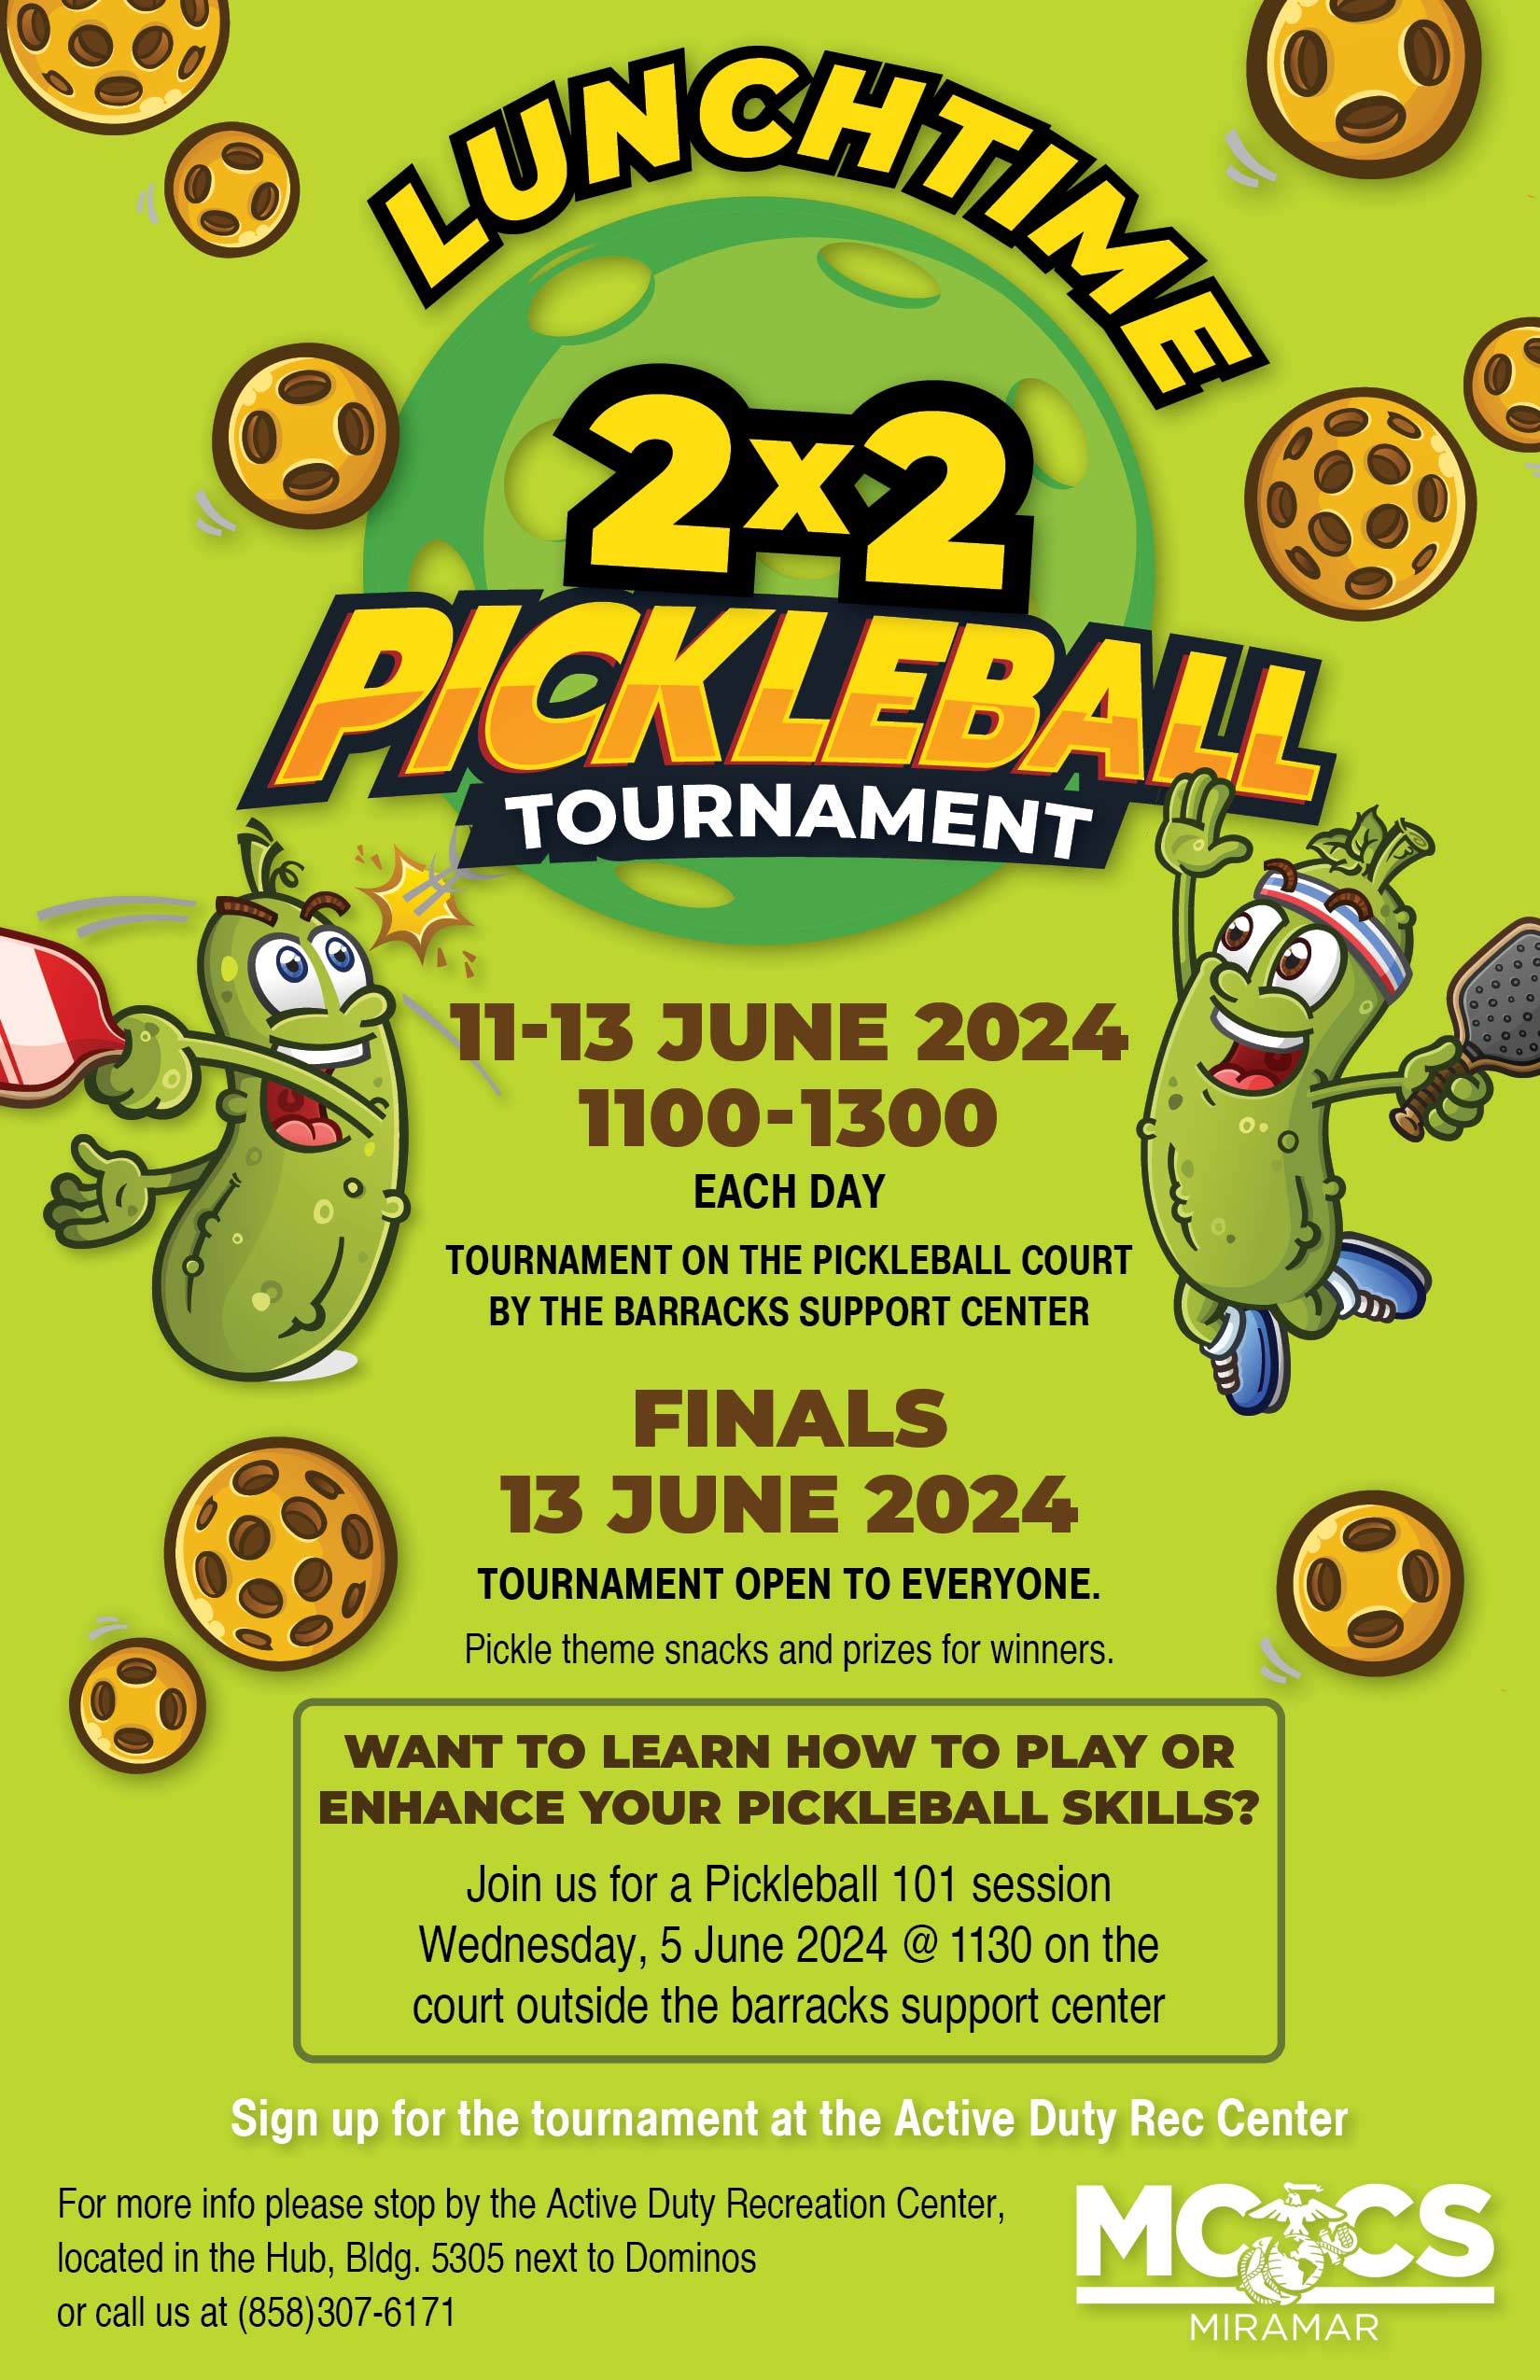 2x2 Pickleball Tournament from June 11 to 13, 11:00 am to 1:00 pm every day. Pickleball Court by the Barracks Support Center.